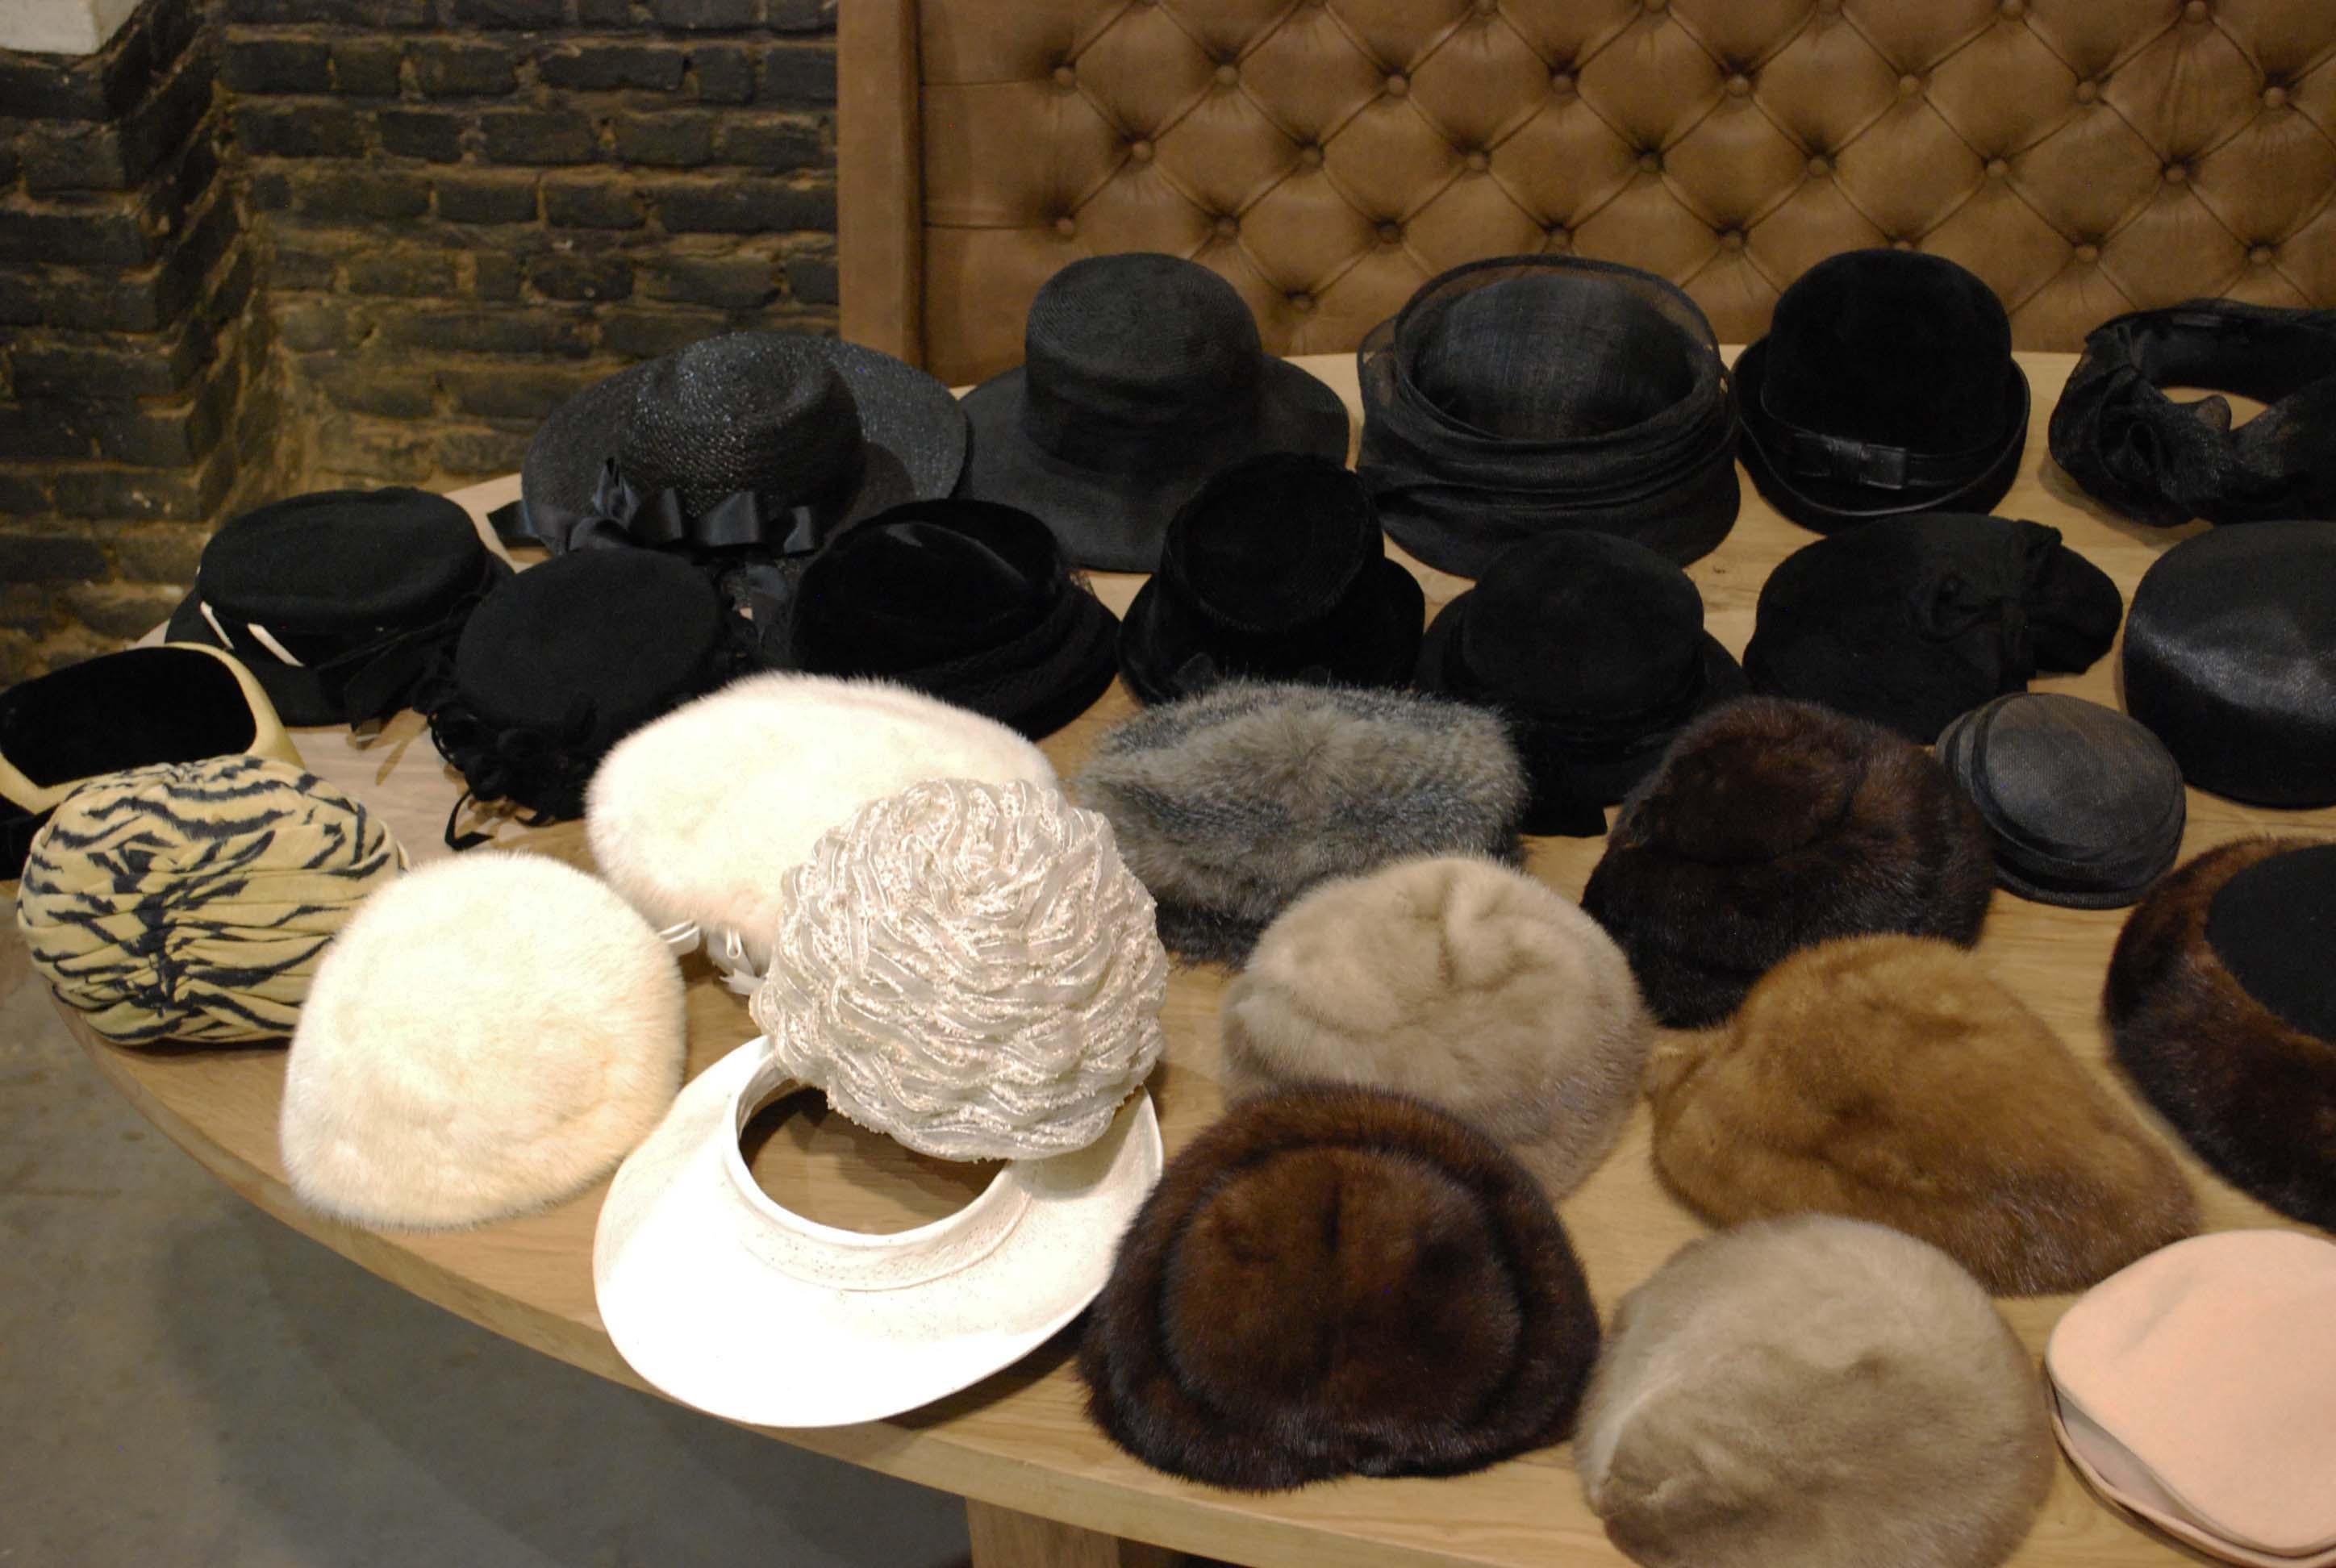 This is a collection of 40 hats in various sizes and makes.
These hats were acquired from a discontinued boutique in Brugges, Belgium.
Most of these hats are therefor as new.
Some of them have a label inside. Some of the brands are Kristin